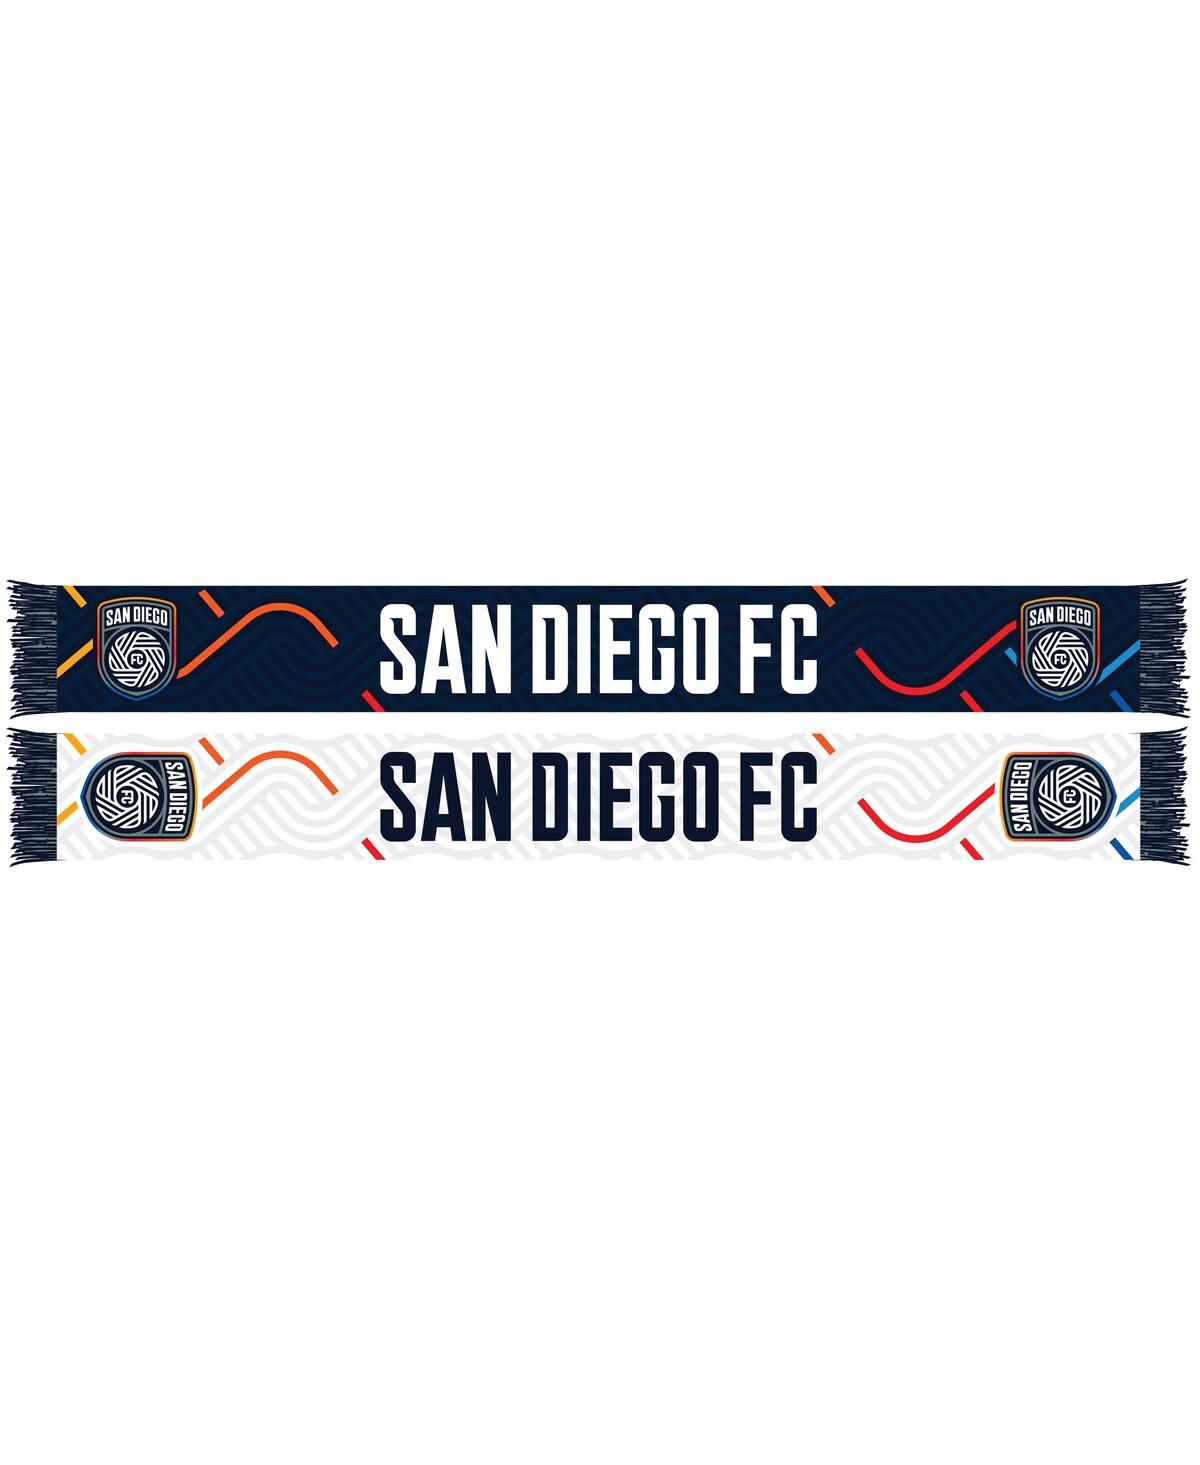 Men's and Women's Ruffneck Scarves Blue San Diego Fc Community Colors Summer Scarf - Blue